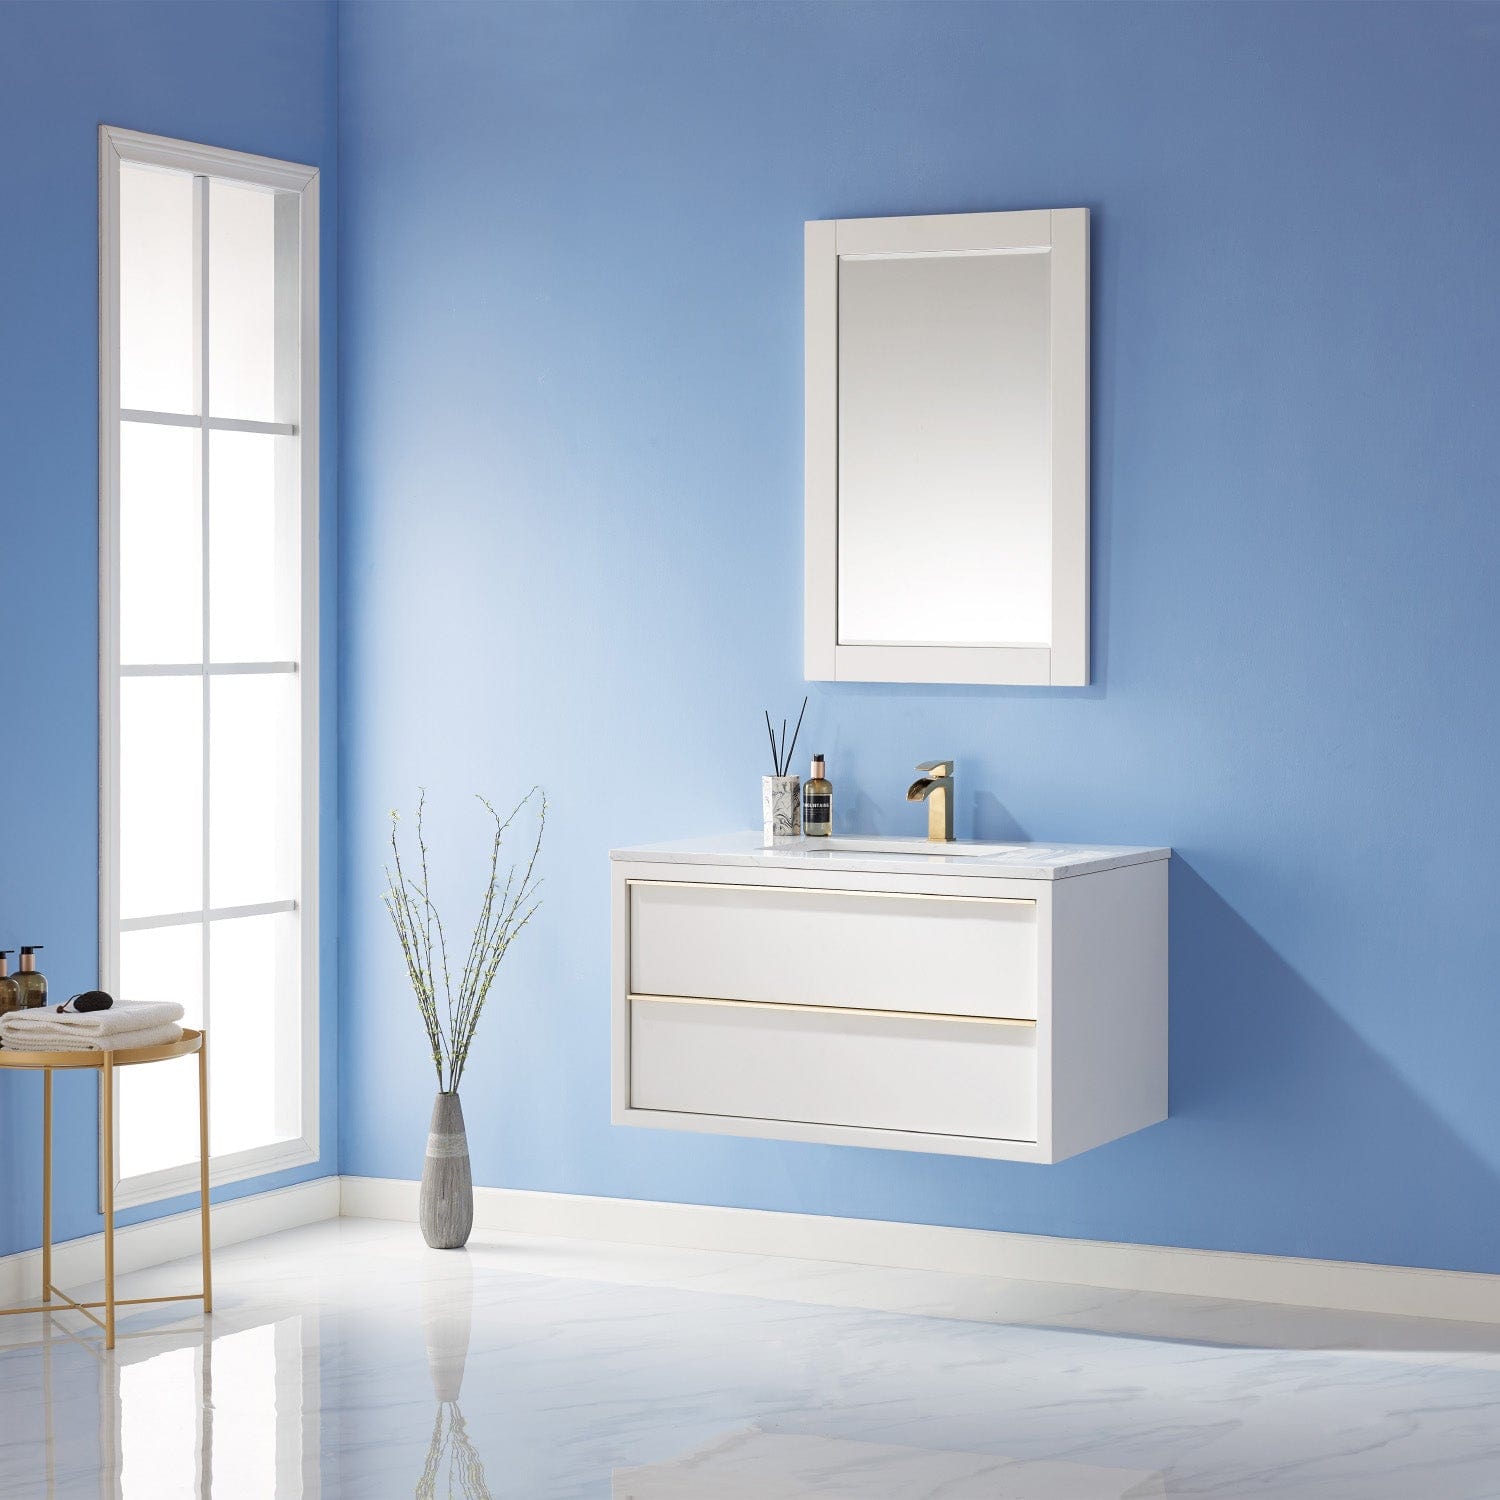 Altair Morgan 36" Single Bathroom Vanity Set in White and Composite Carrara White Stone Countertop with Mirror 534036-WH-AW - Molaix631112971751Vanity534036-WH-AW